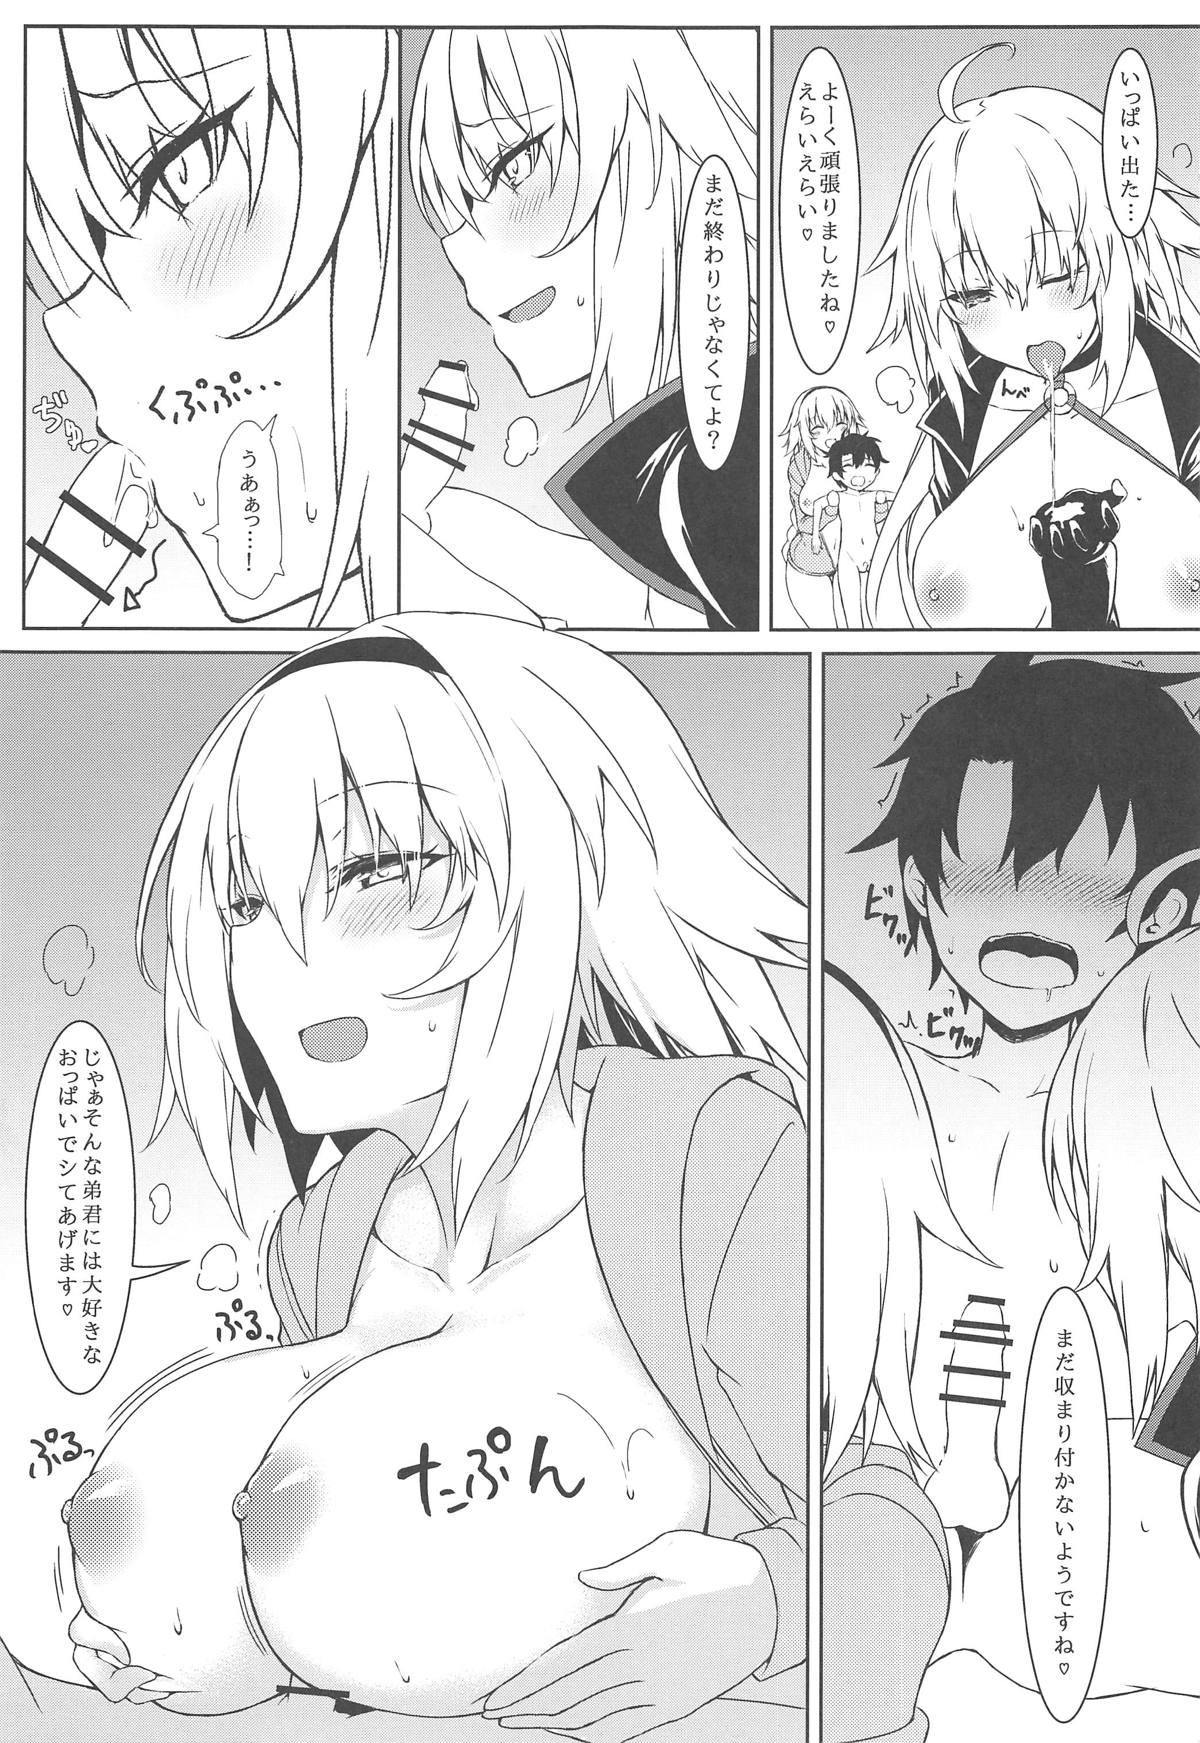 American Onee-chan Sassuga! - Fate grand order 18yearsold - Page 7